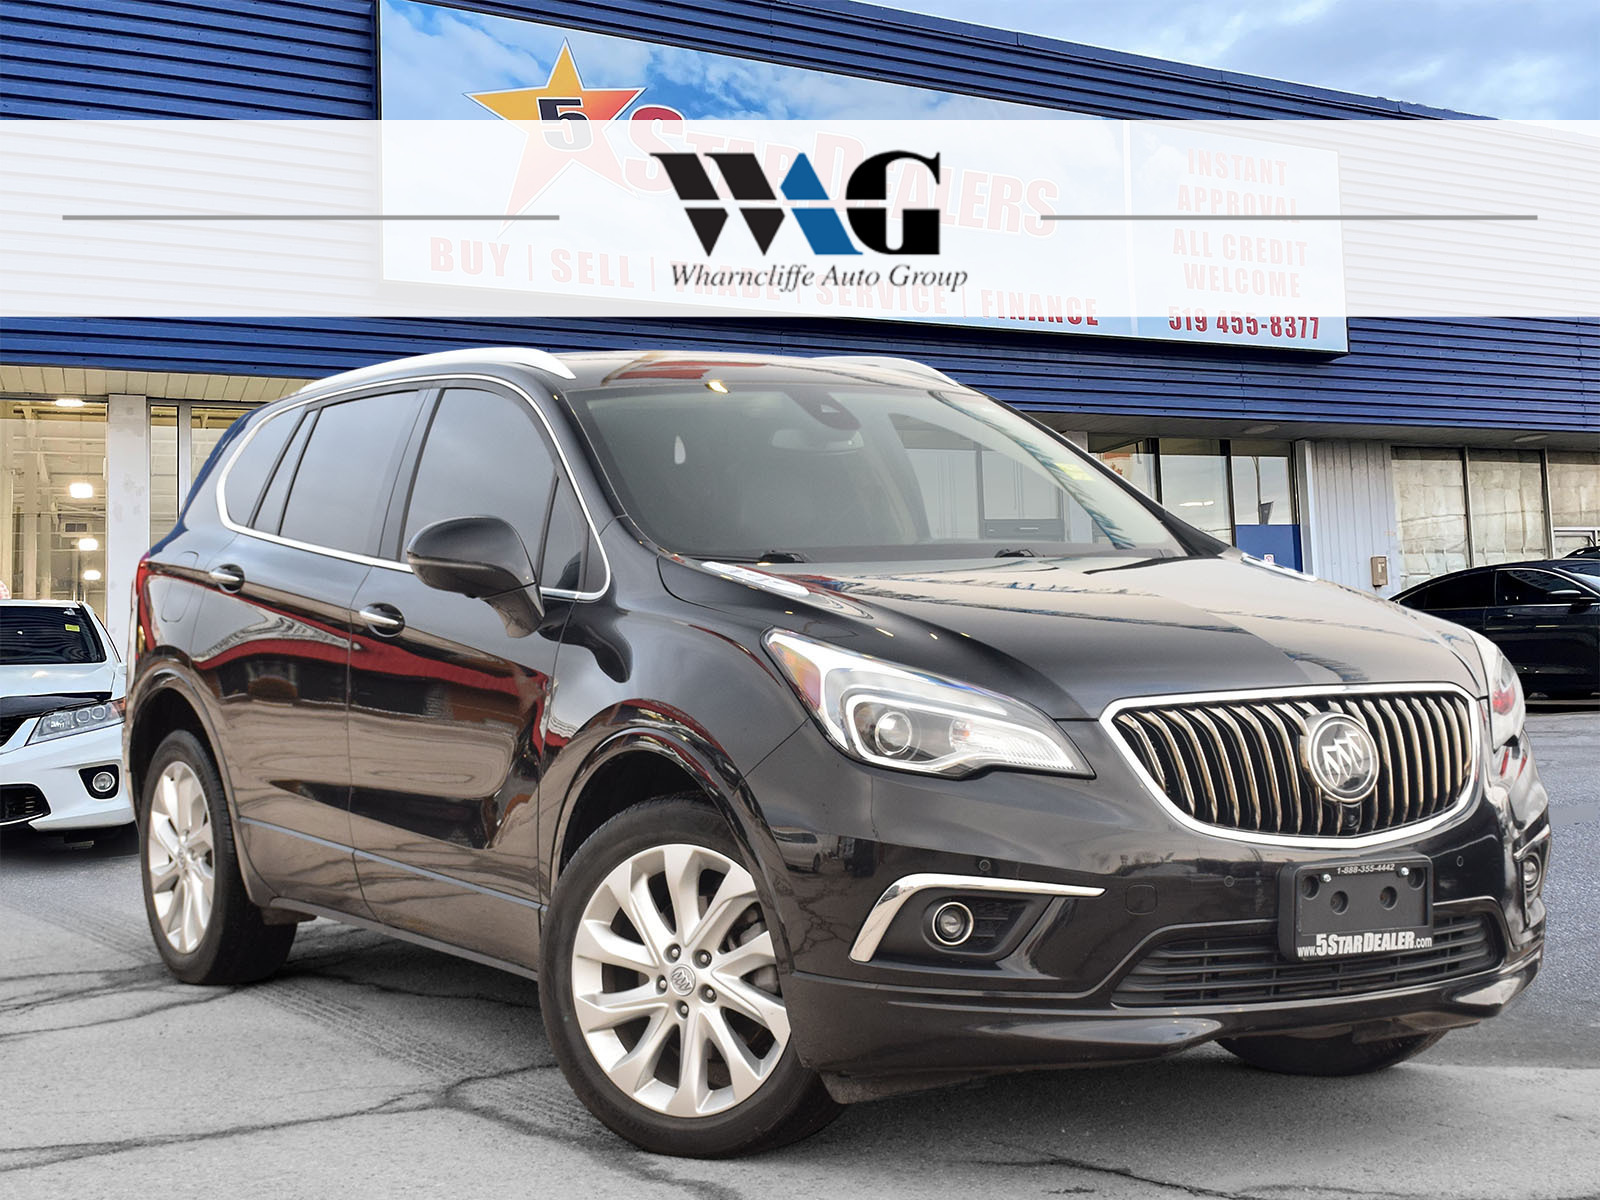 2016 Buick Envision NAV LEATHER SUNROOF LOADED! WE FINANCE ALL CREDIT